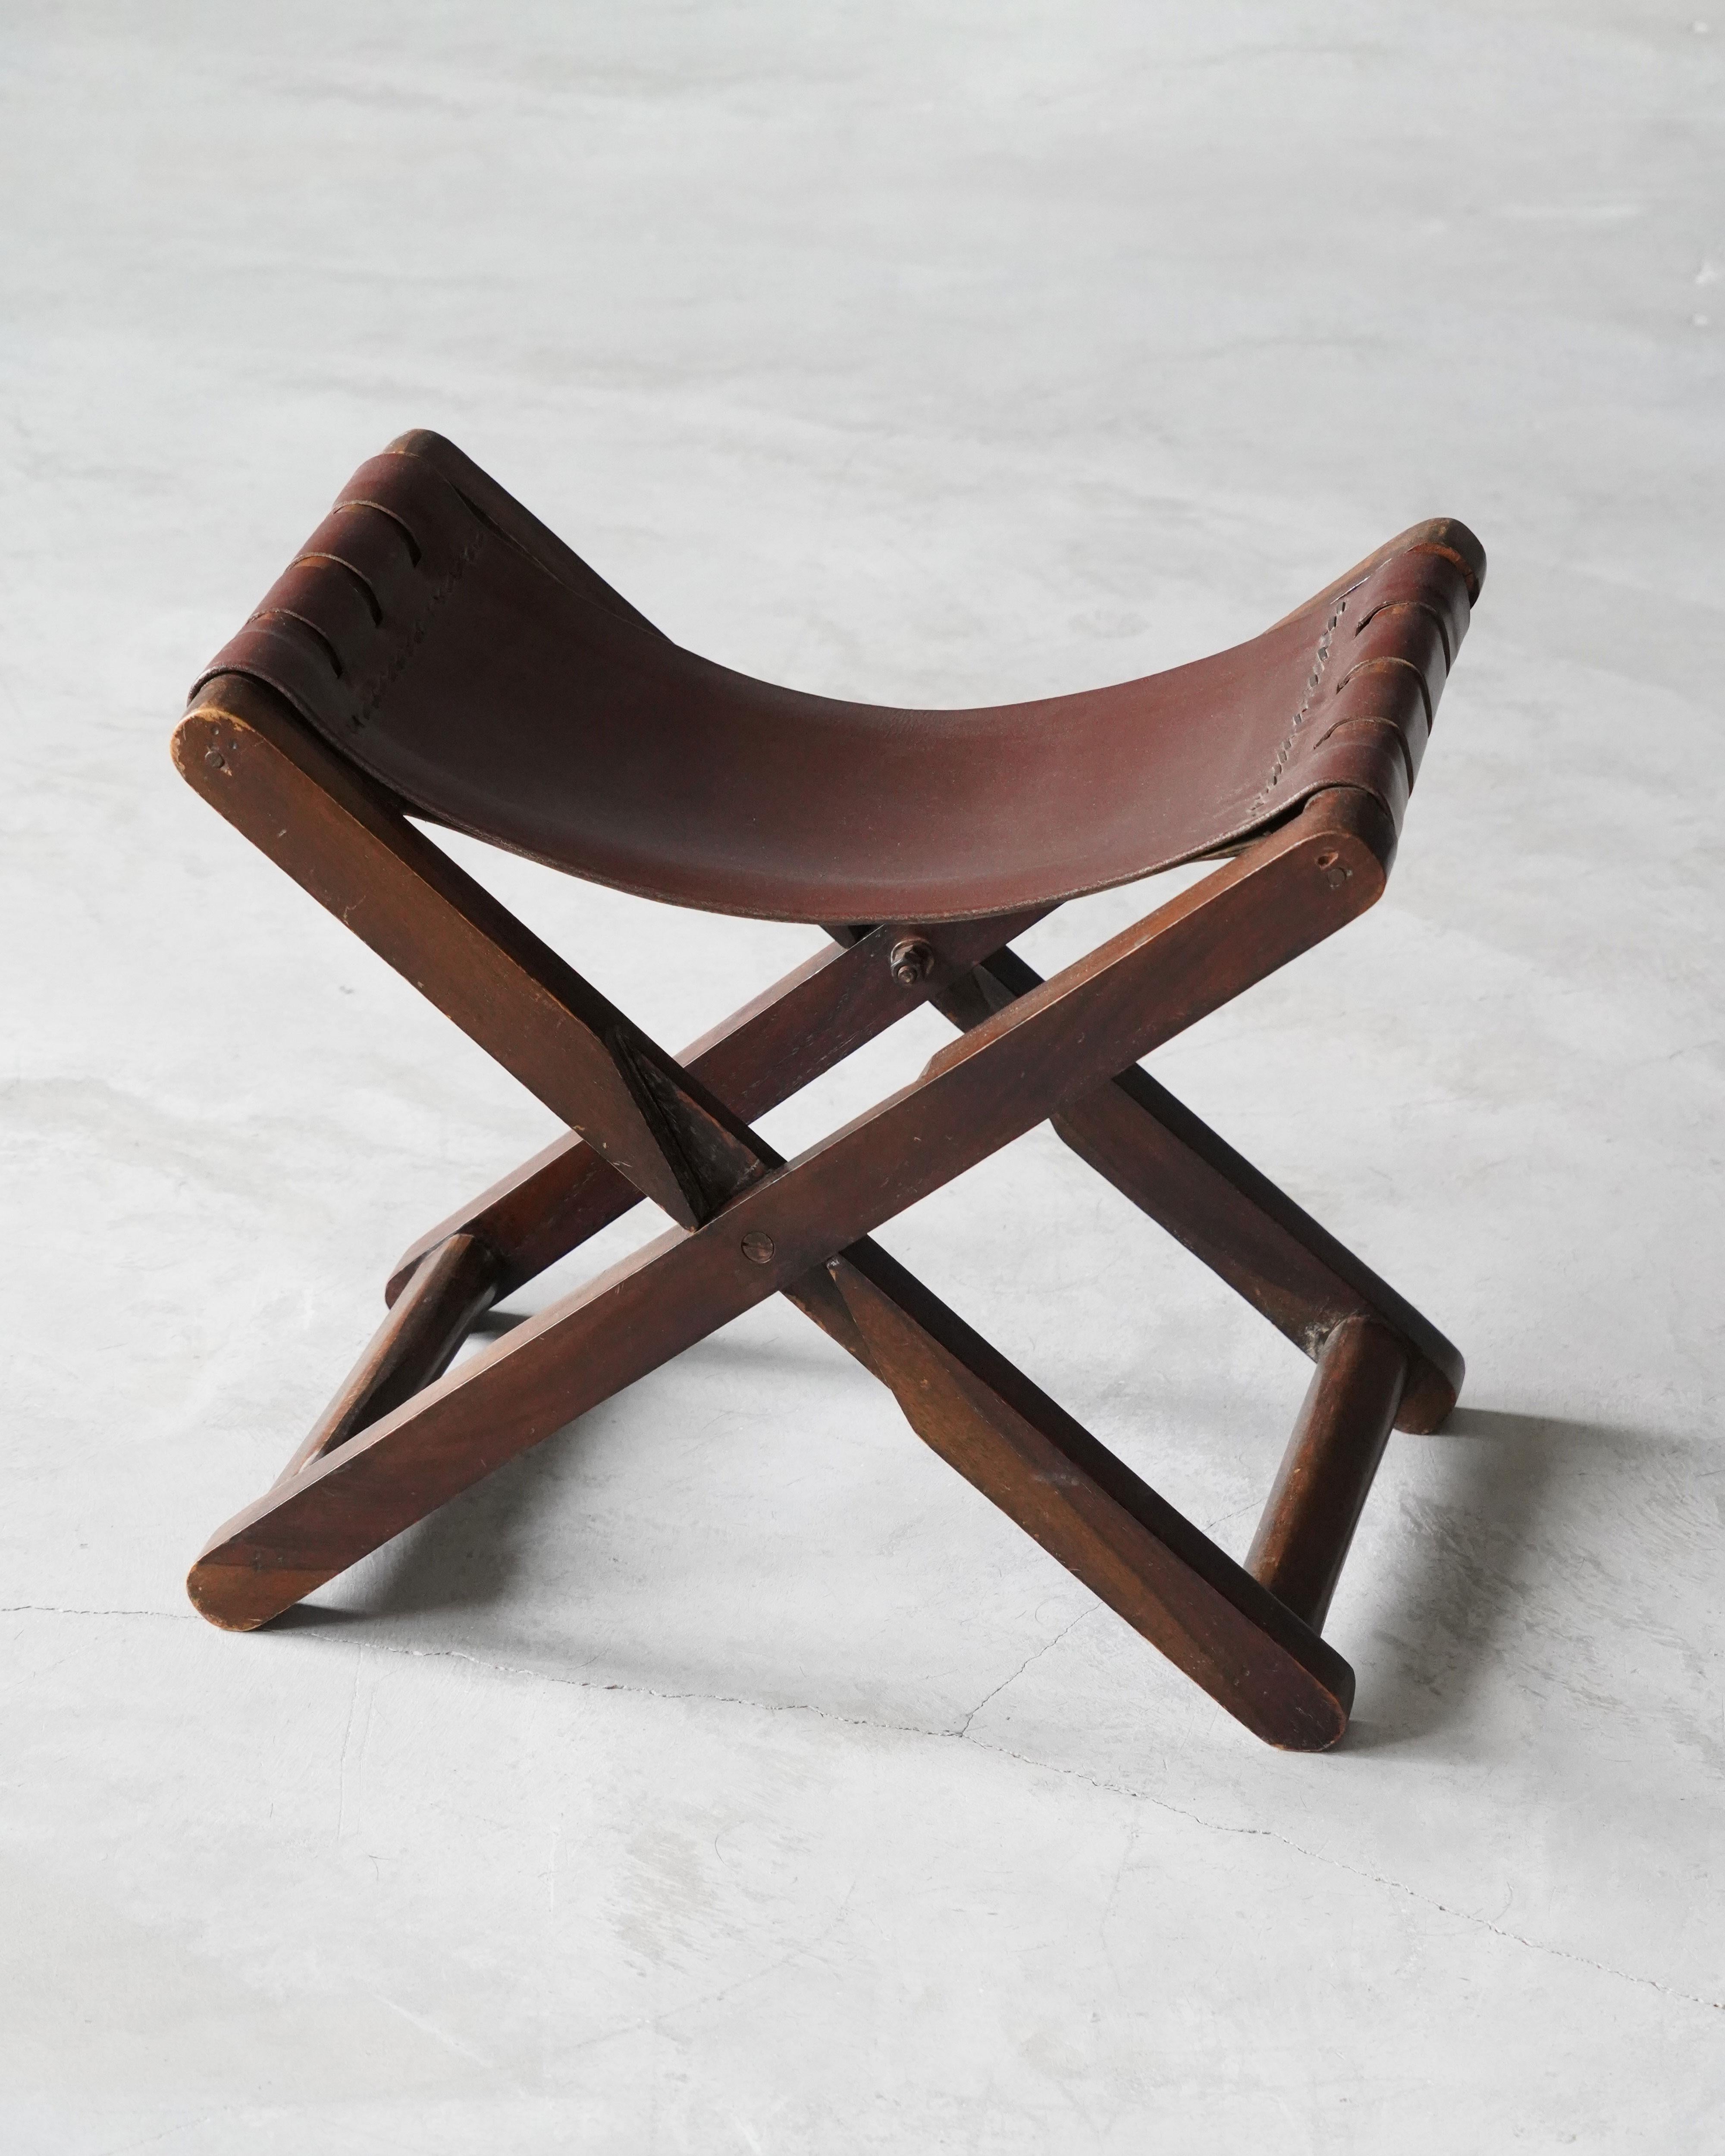 A foldable stool, designed and produced in Denmark, c. 1940s. Stained wood and original leather.